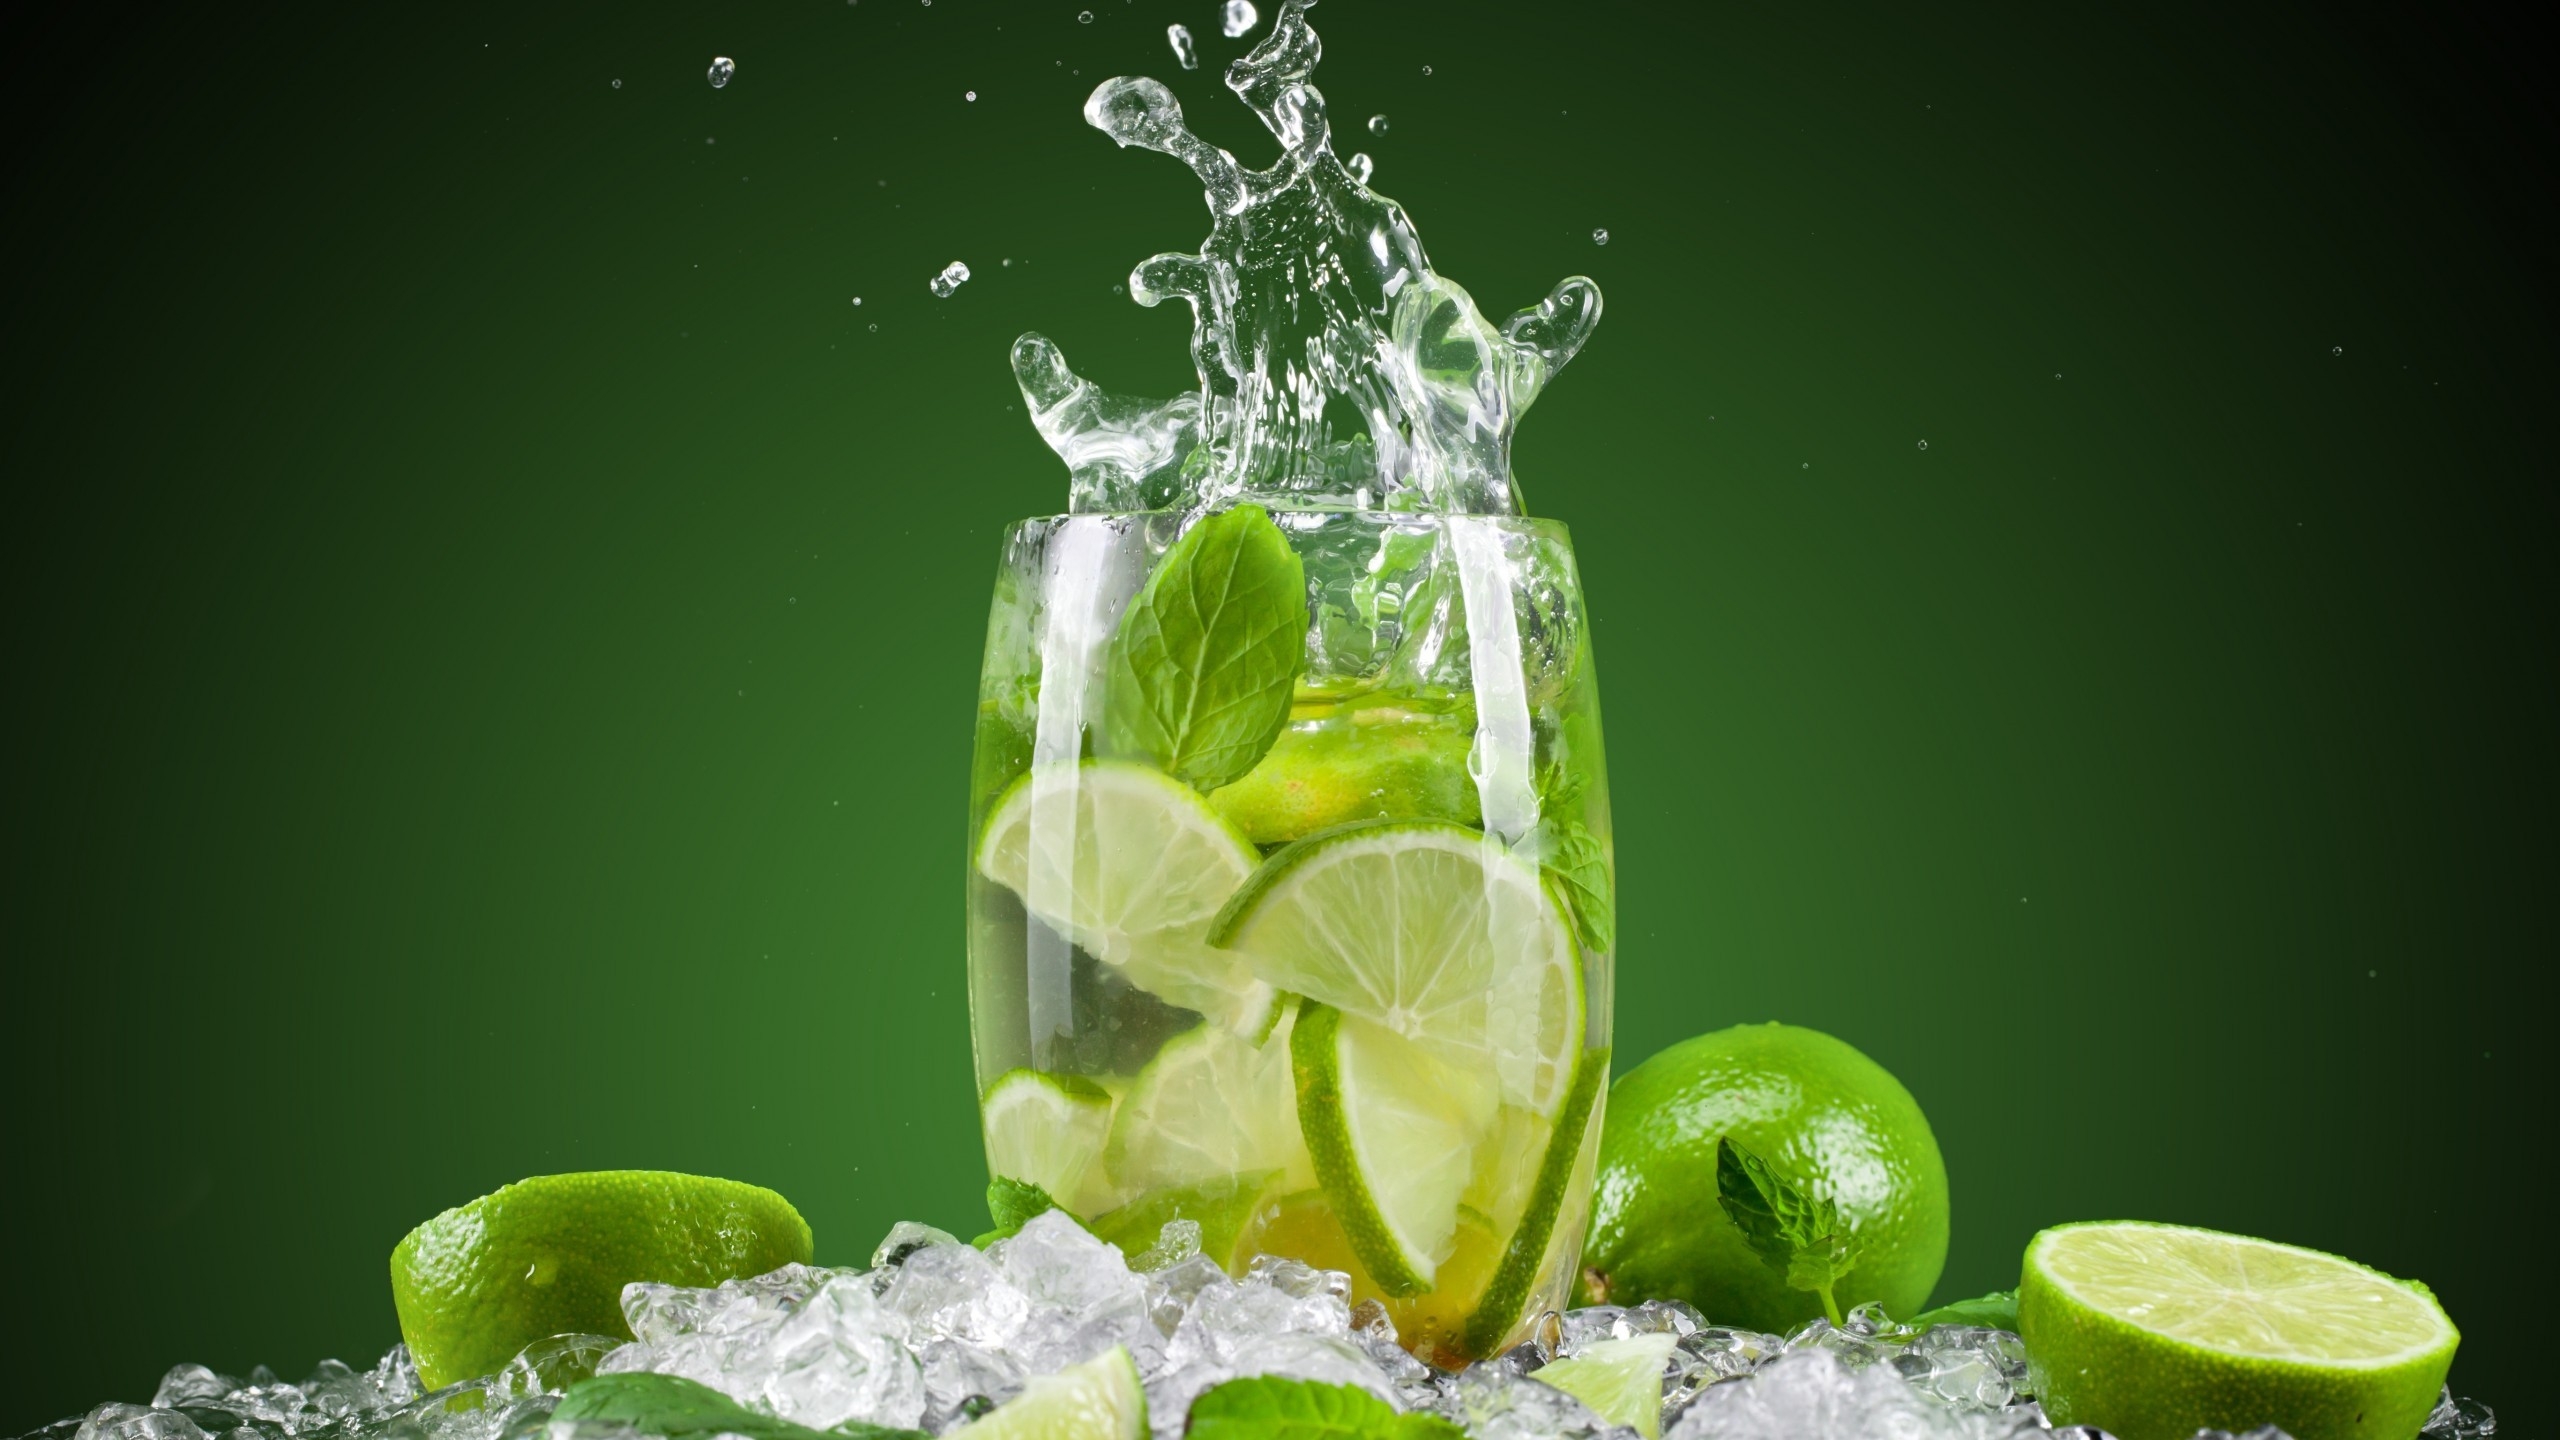 Mojito Cocktail Drink for 2560x1440 HDTV resolution